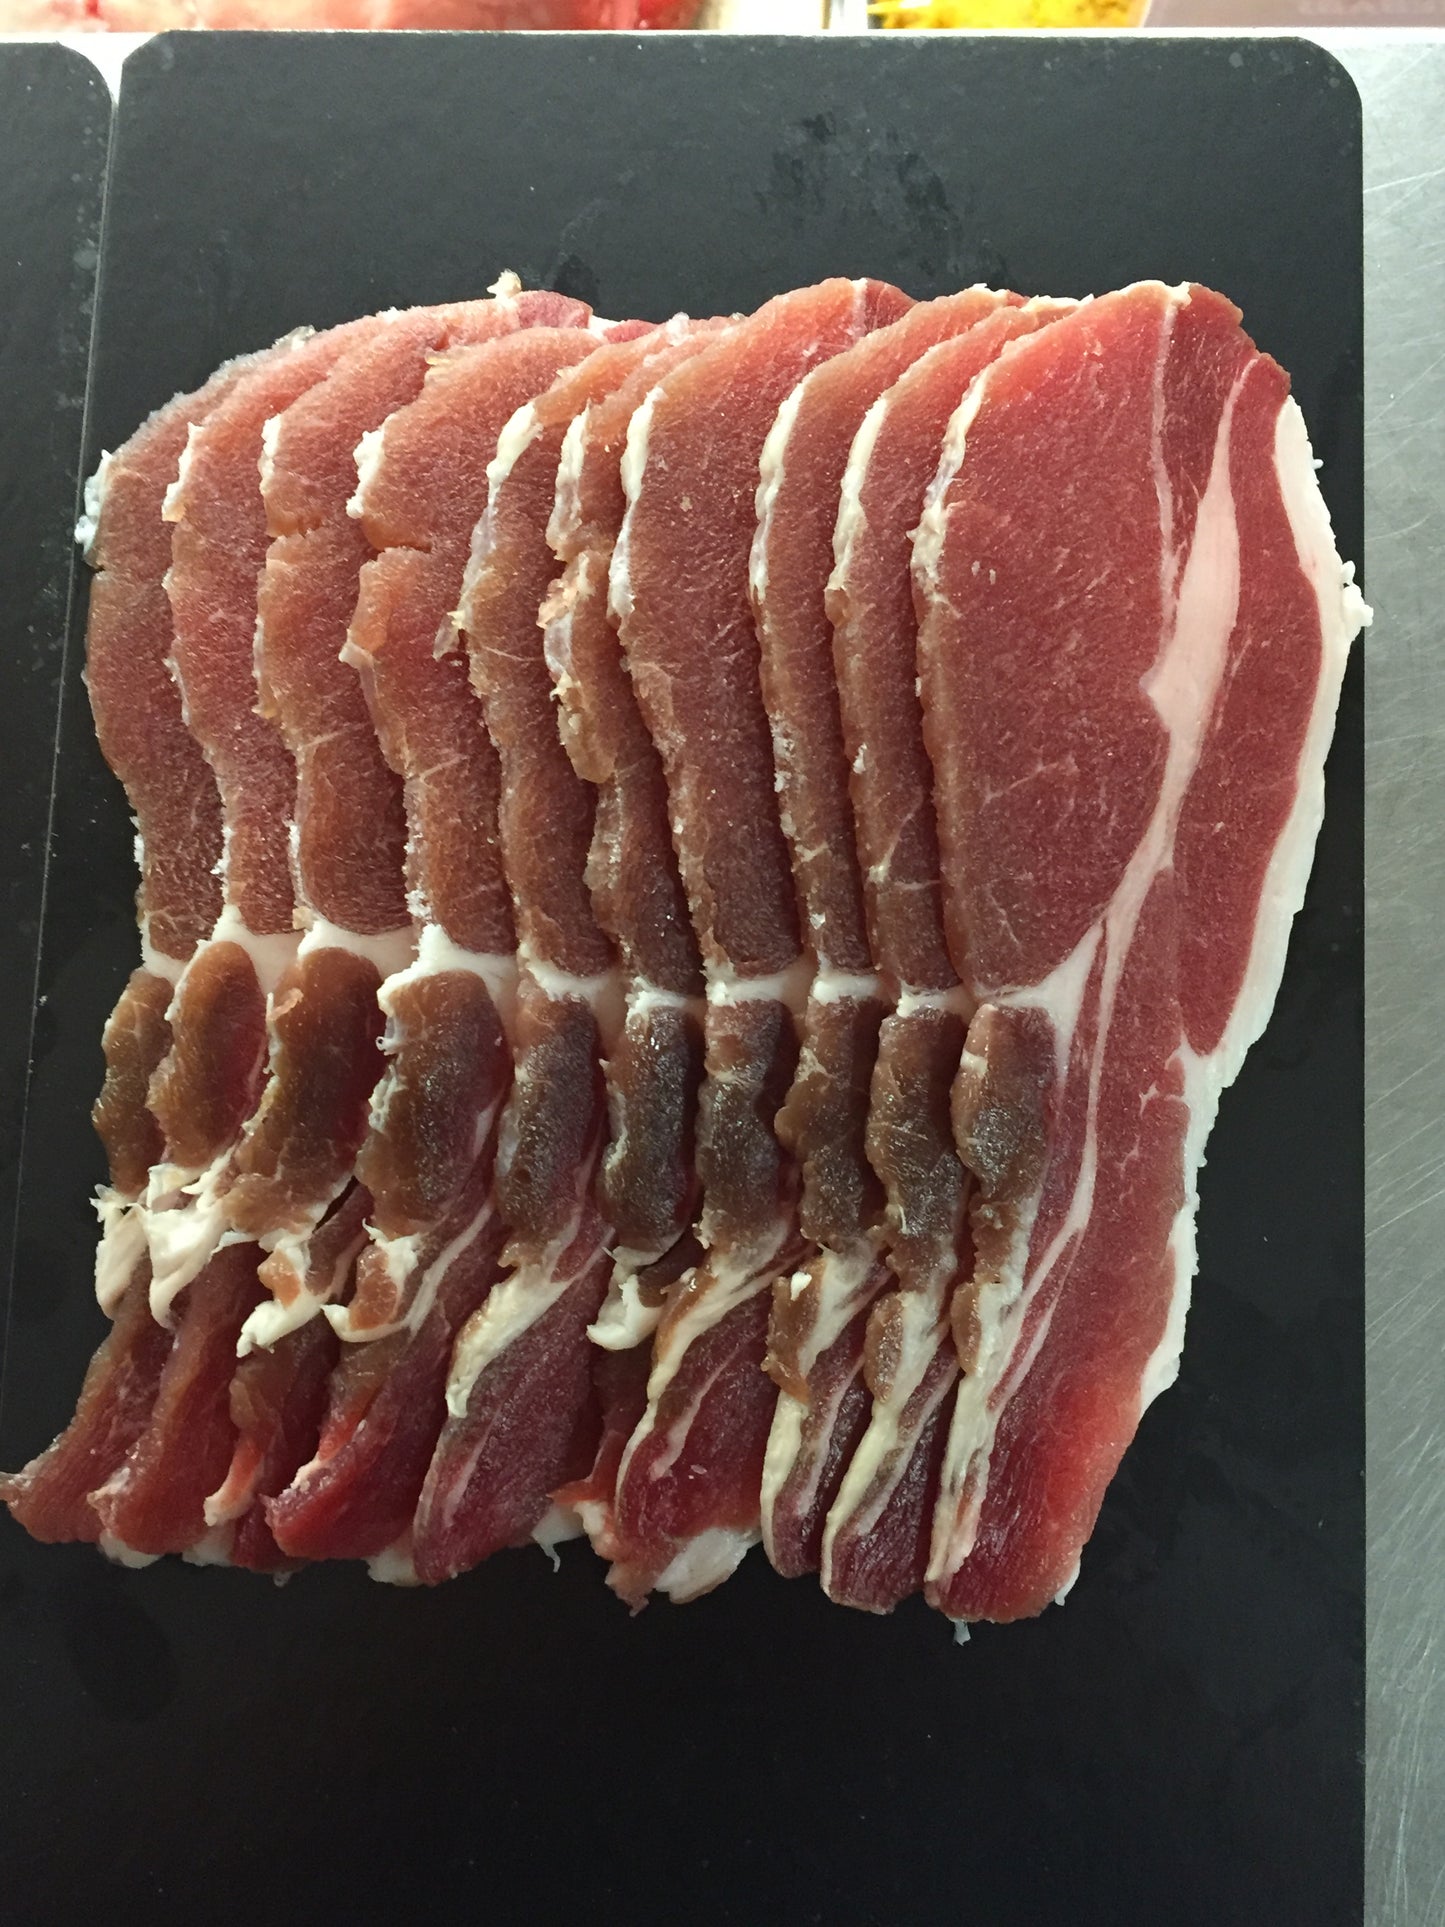 Dry Cured Back Bacon